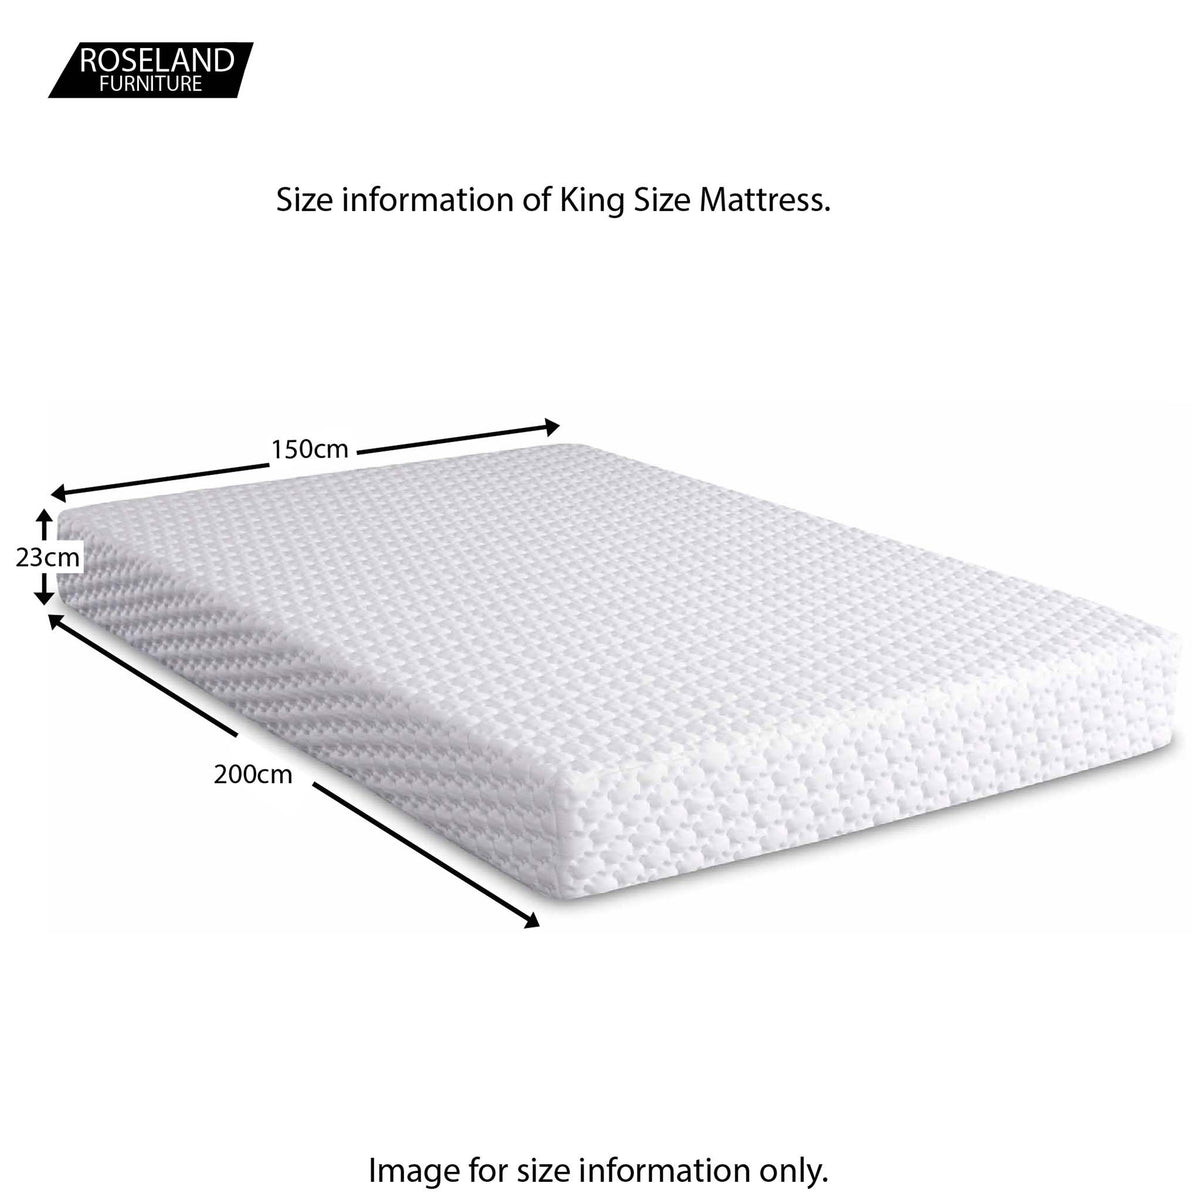 MemoryPedic Hybrid 2000 Mattresses with Latex & Memory Foam - adult 5ft king size size guide